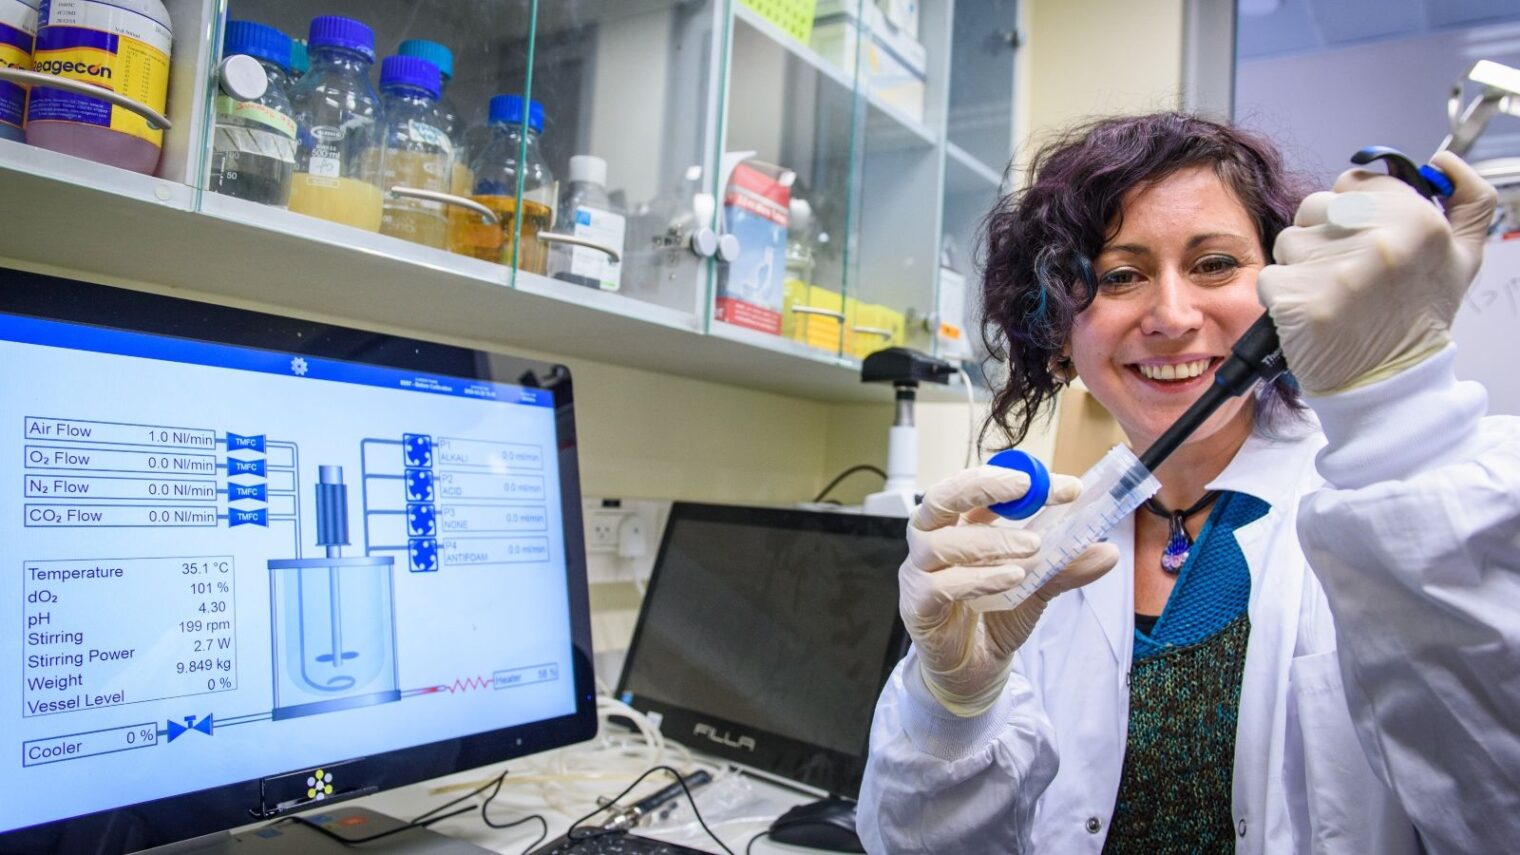 Dr. Nadia Grozdev working on vaccine for the coronavirus at the Migal Galilee Research Institute in Kiryat Shmona, March 5, 2020. Photo by Basel Awidat/Flash90